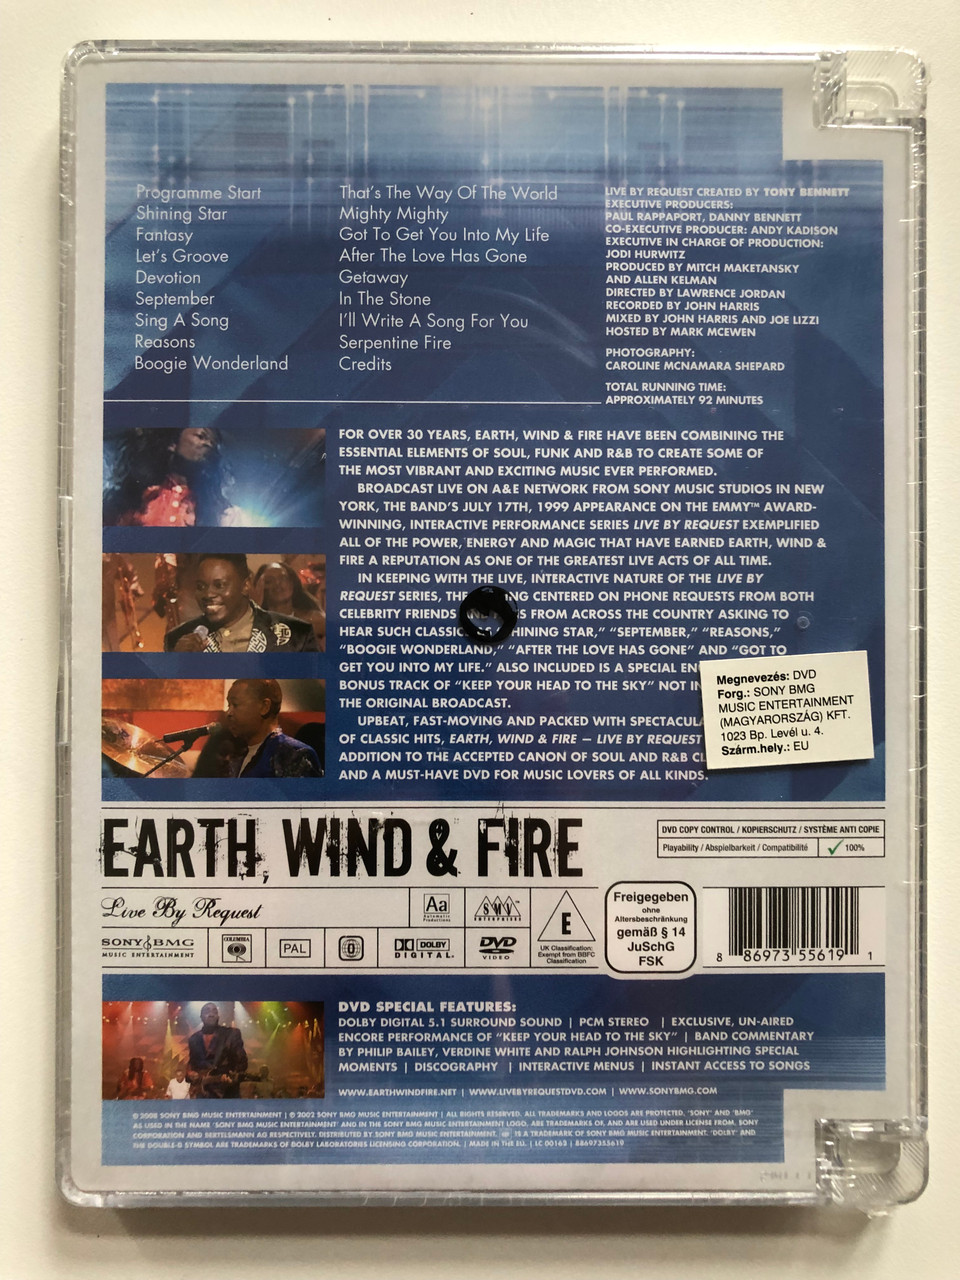 Earth_Wind_Fire_Live_By_Request_CLASSIC_HITS_EARTH_WIND_FIRE_-_LIVE_BY_REQUEST_ONE_OF_THE_GREATEST_LIVE_ACTS_OF_ALL_TIME_THE_BANDS_JULY_17TH_1999_APPEAR_3__09940.1692417458.1280.1280.JPG (960×1280)